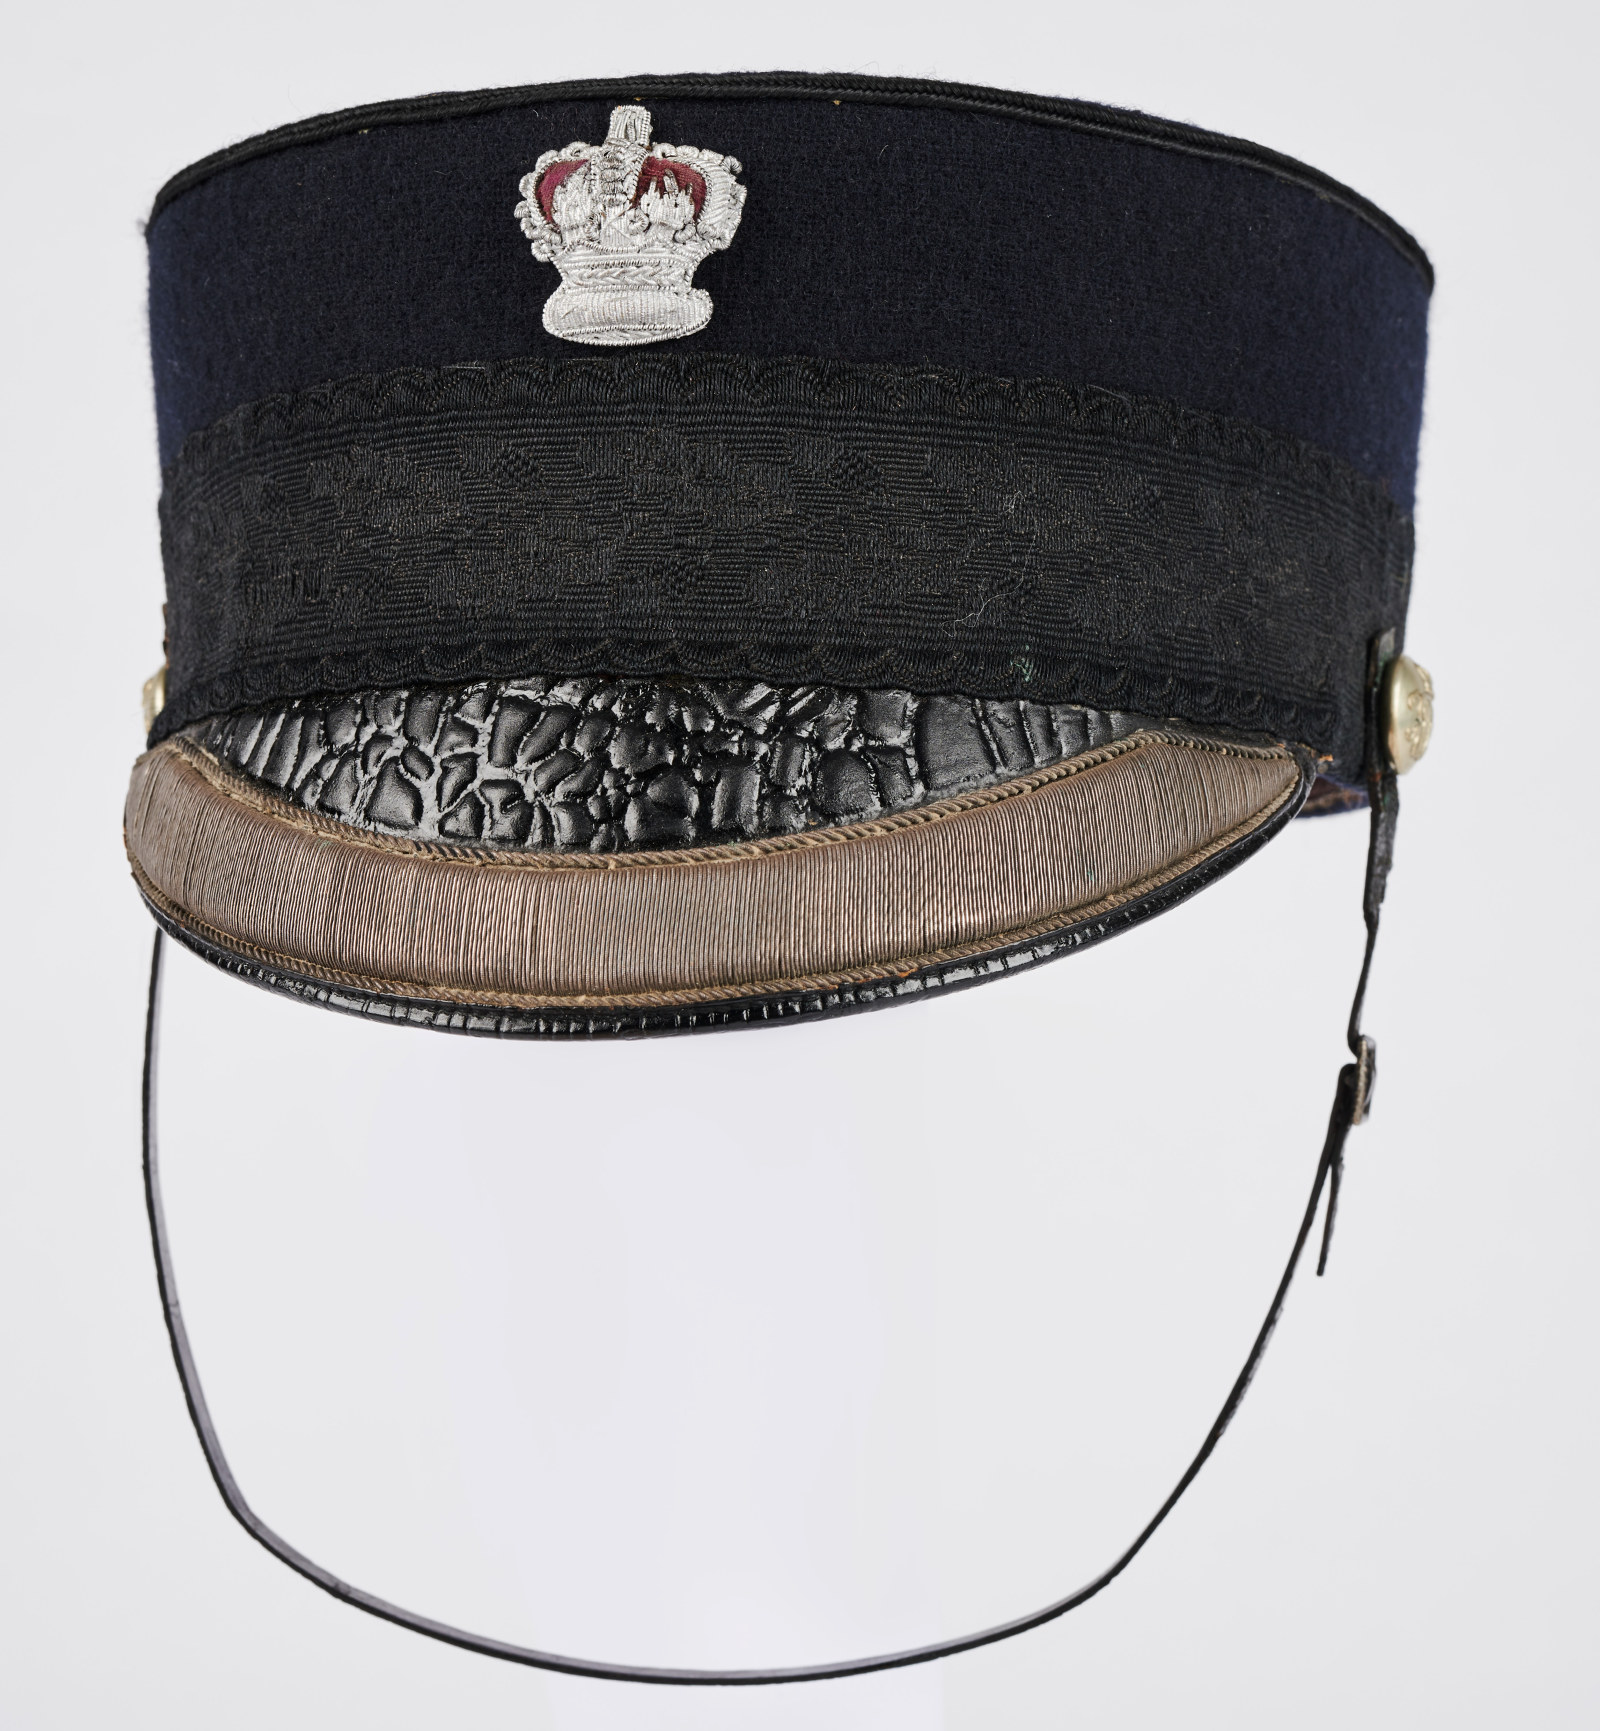 This braided pill-box style cap was part of the uniform issued to Edward Montague Battye (1817-1898) who served in the NSW Police from 1851-1861 then 1862-1893.